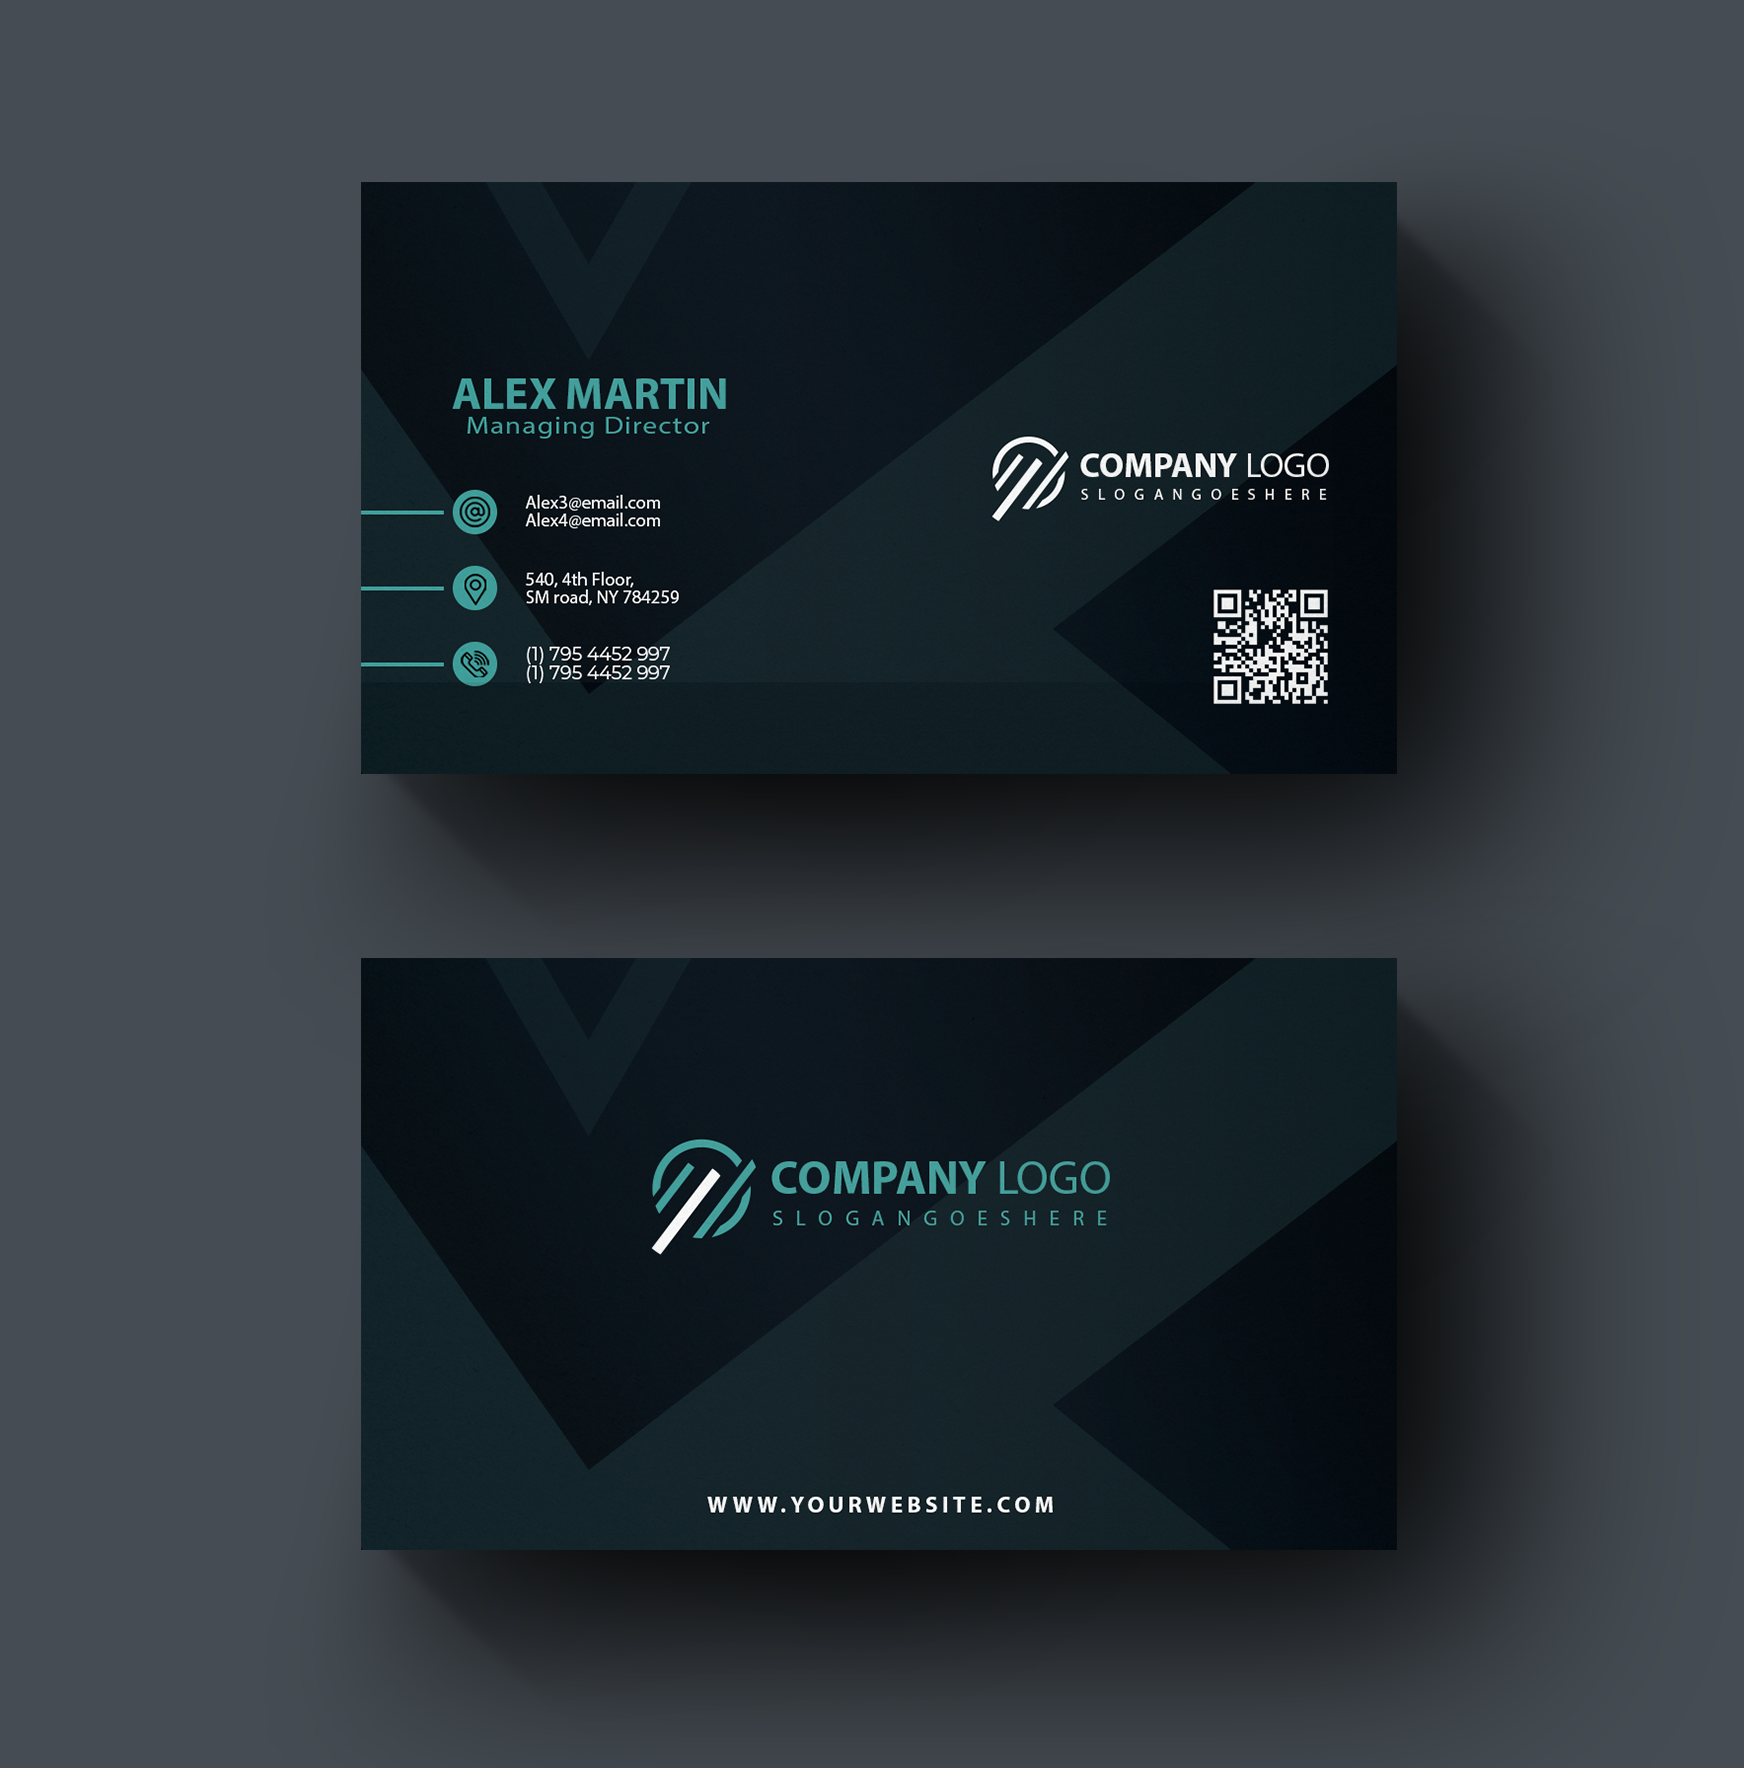 10893Business card